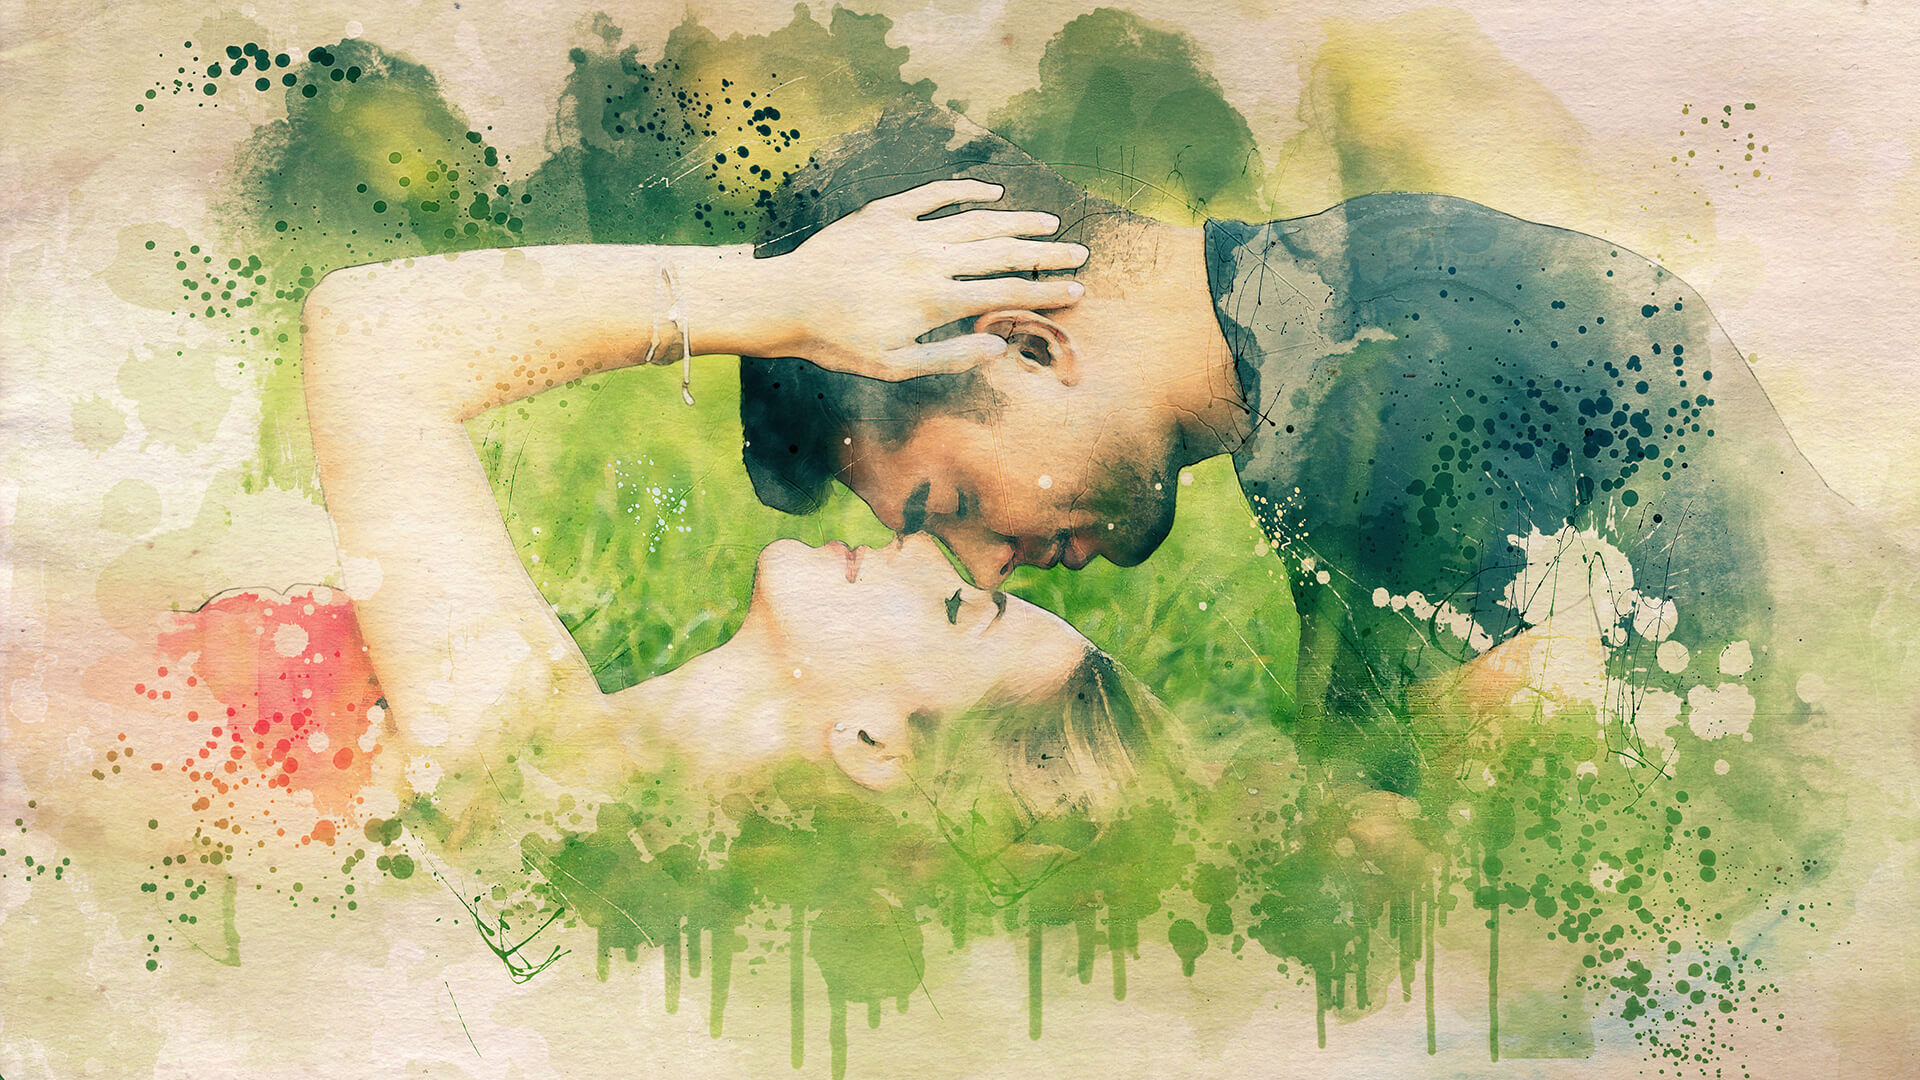 https://paintingvalley.com/image/couple-watercolor-painting-17.jpg